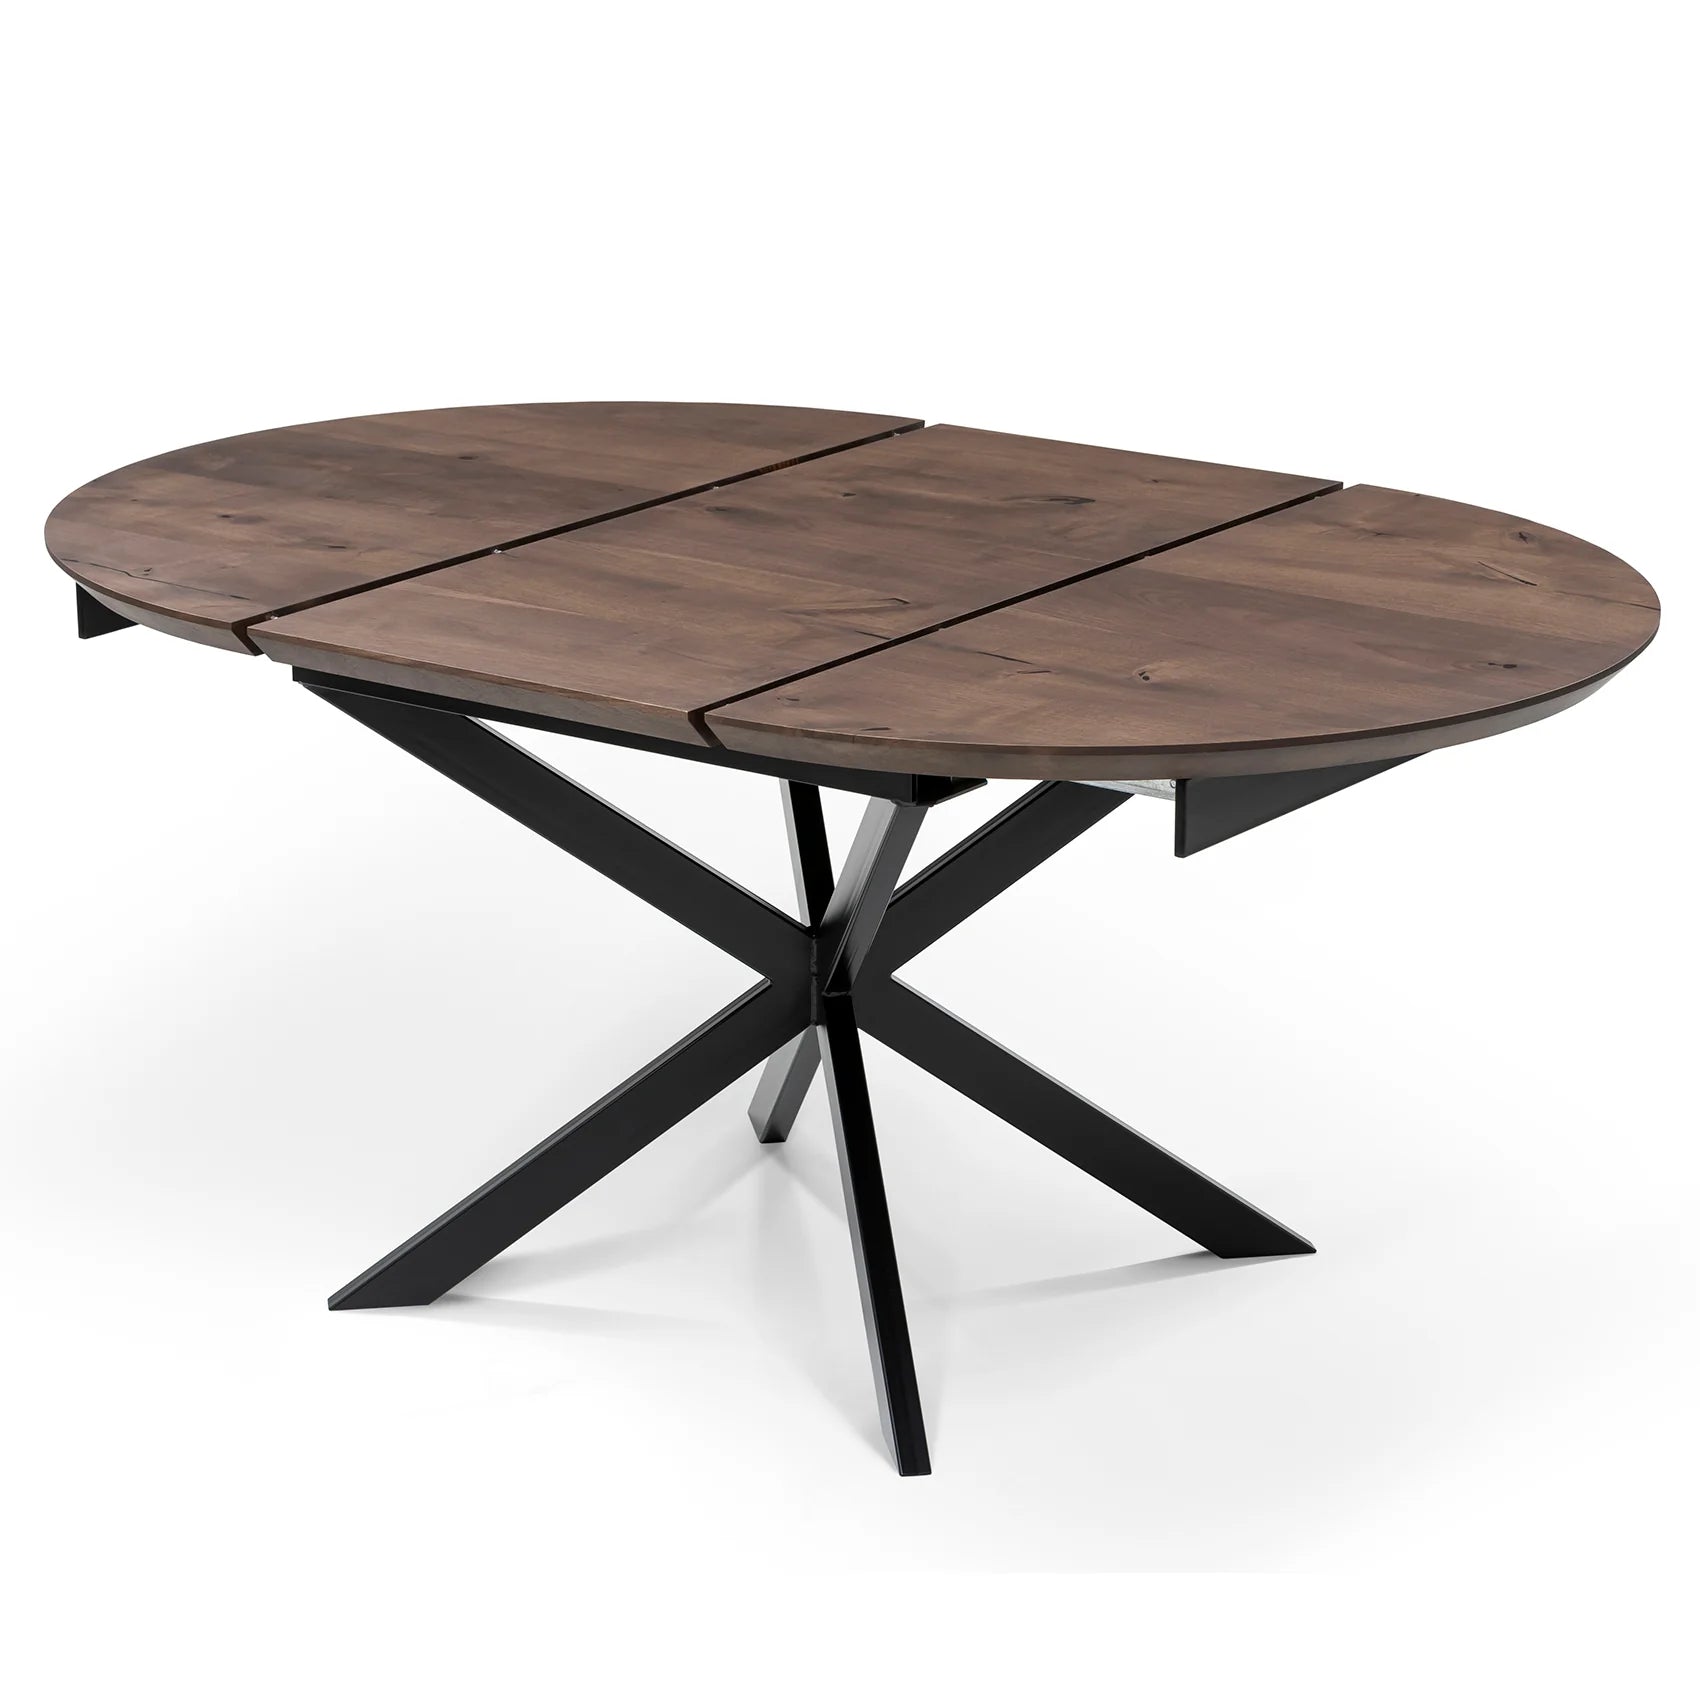 Round Chocolate Walnut Dining Table Extendable - S10Home